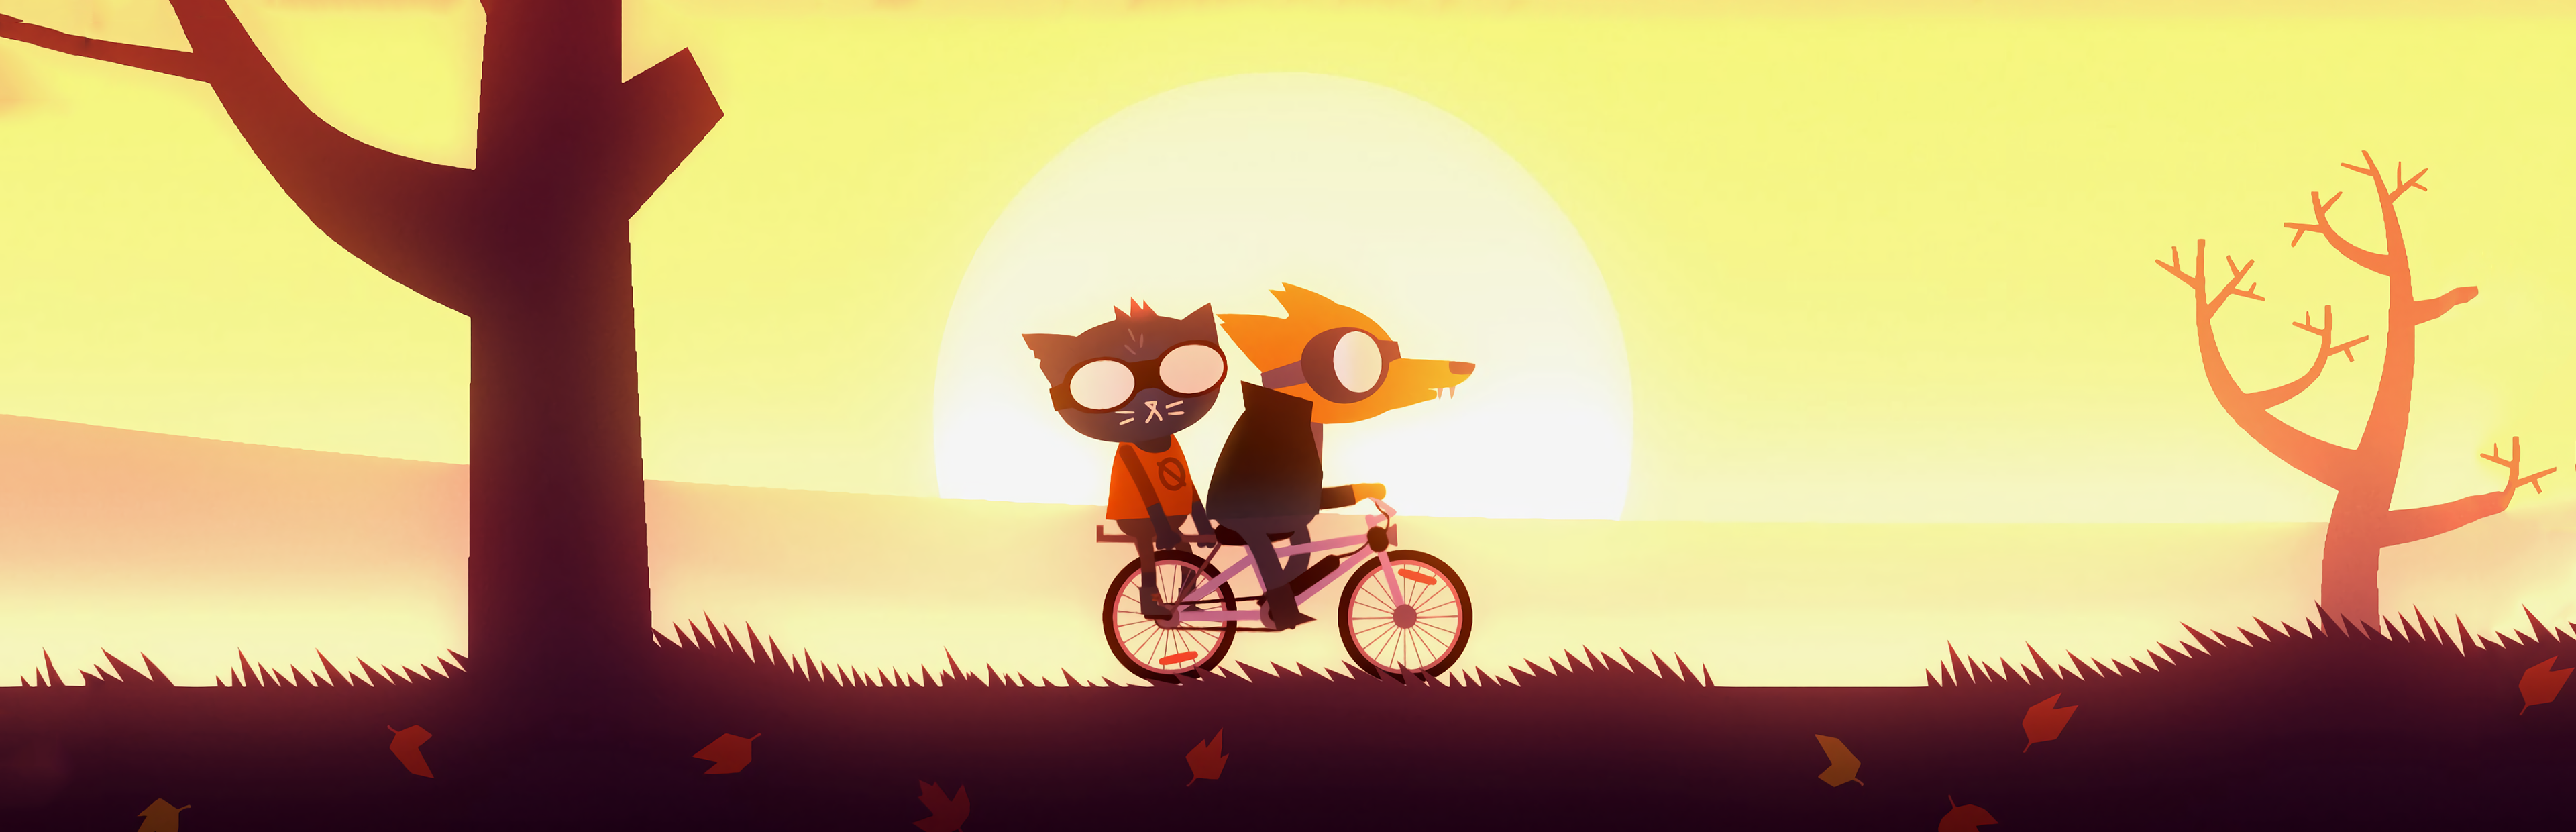 Night in the Woods - SteamGridDB